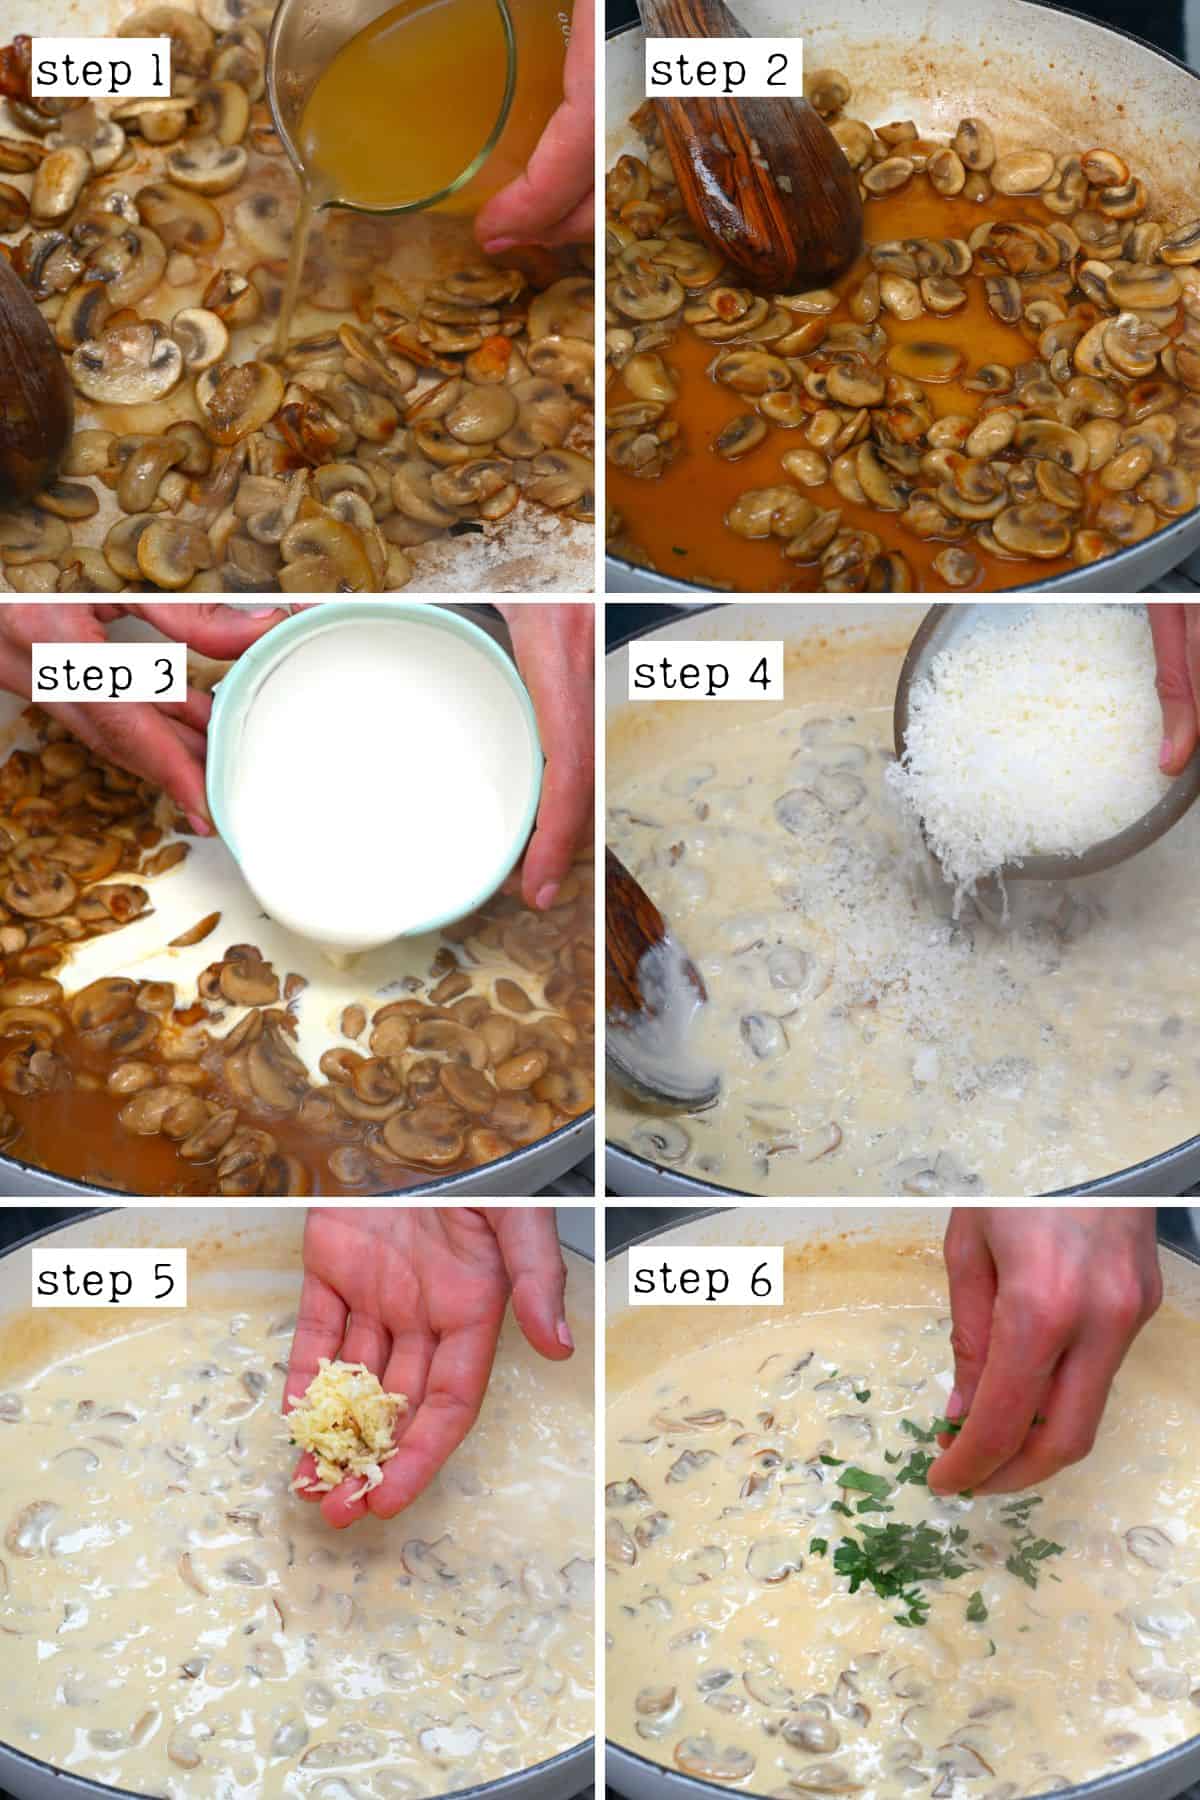 Steps for cooking mushrooms with cream